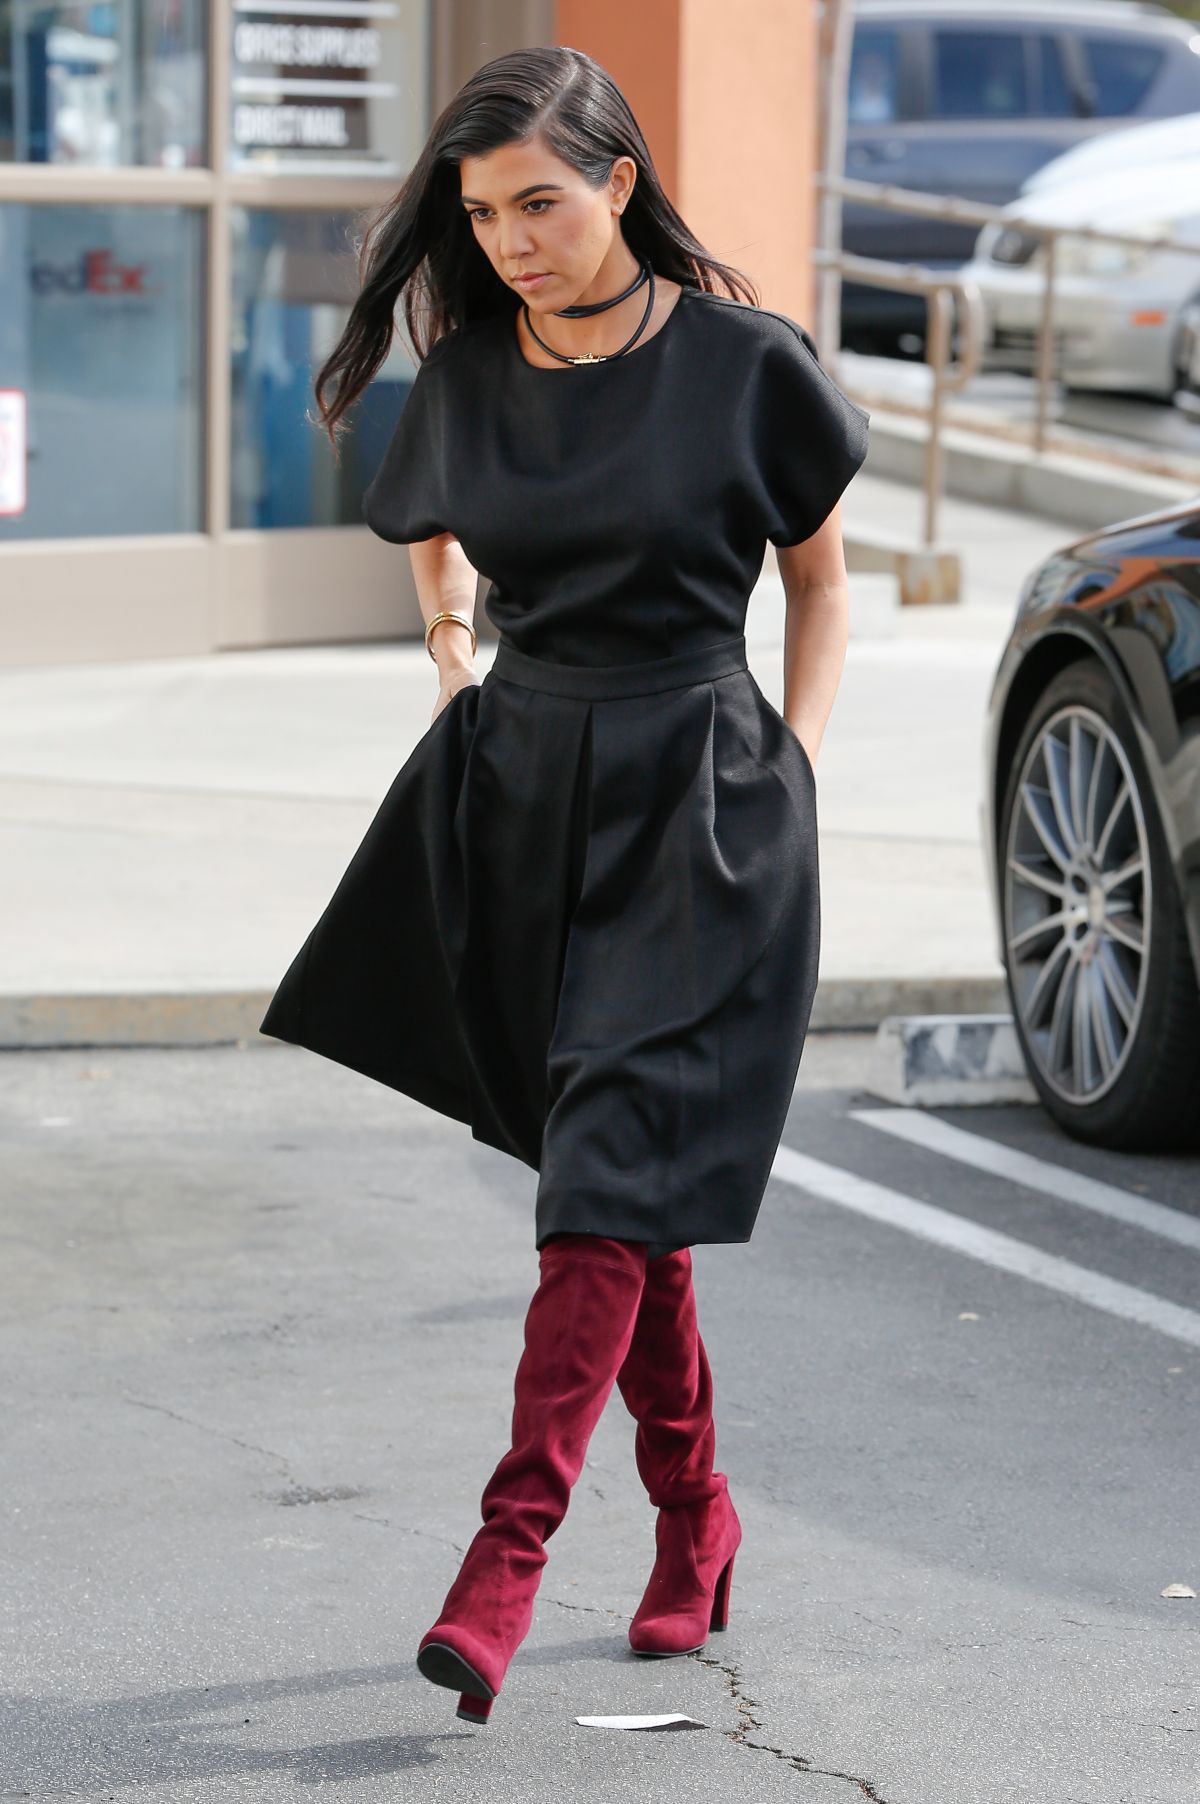 KOURTNEY KARDASHIAN Out and About in Los Angeles 03/08/2016 – HawtCelebs